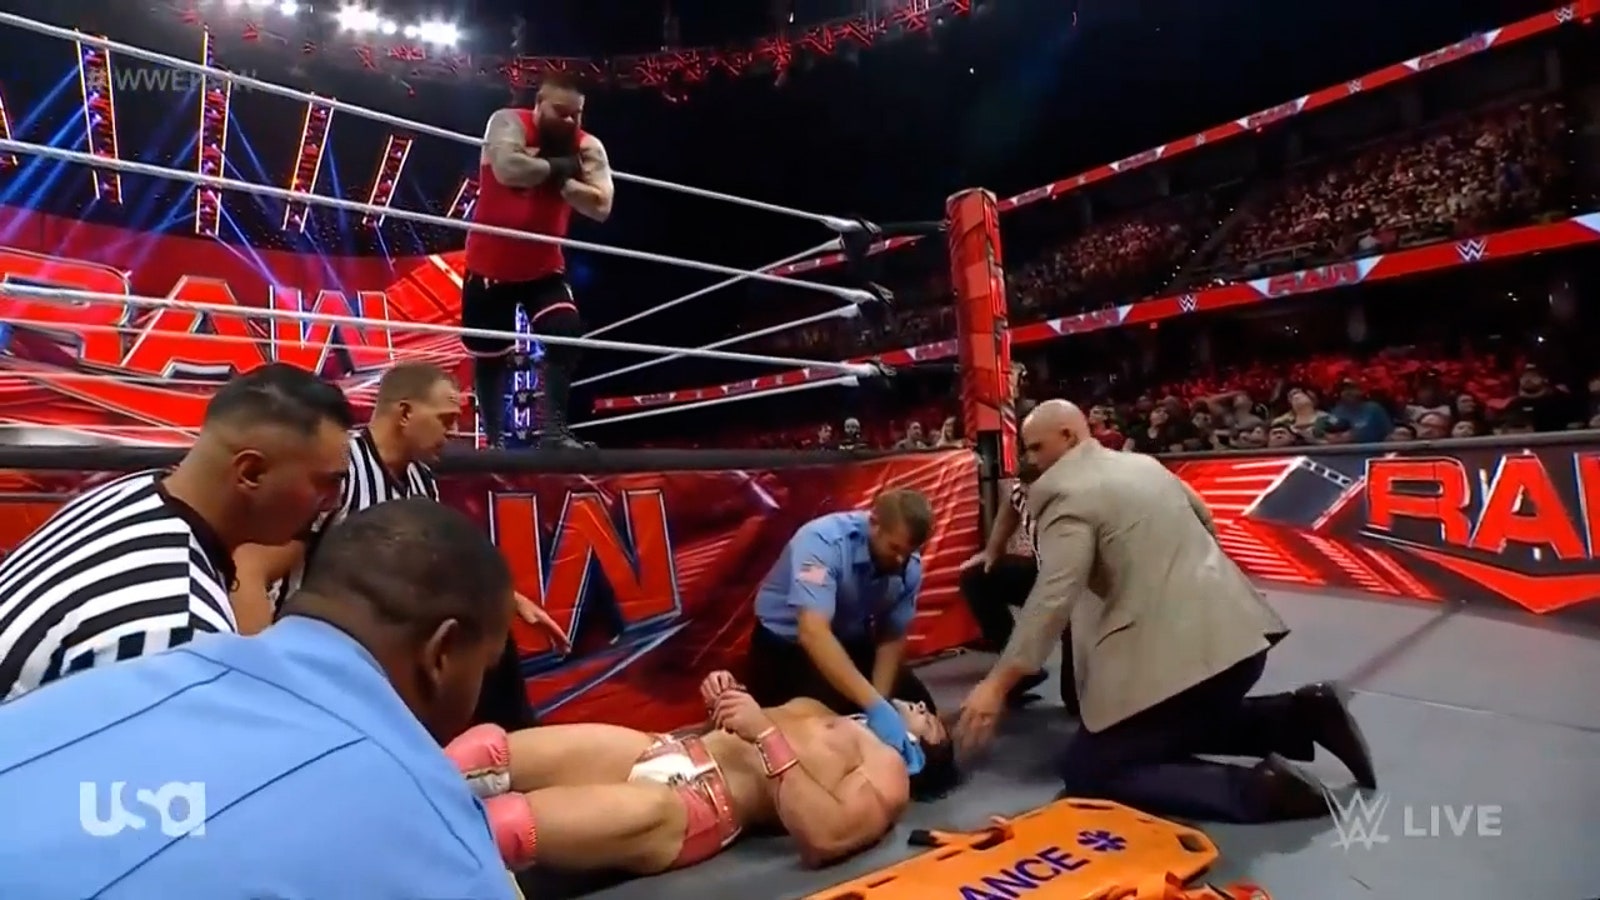 Kevin Owens brutalizes Ezekiel and ends the match early on Monday Night Raw